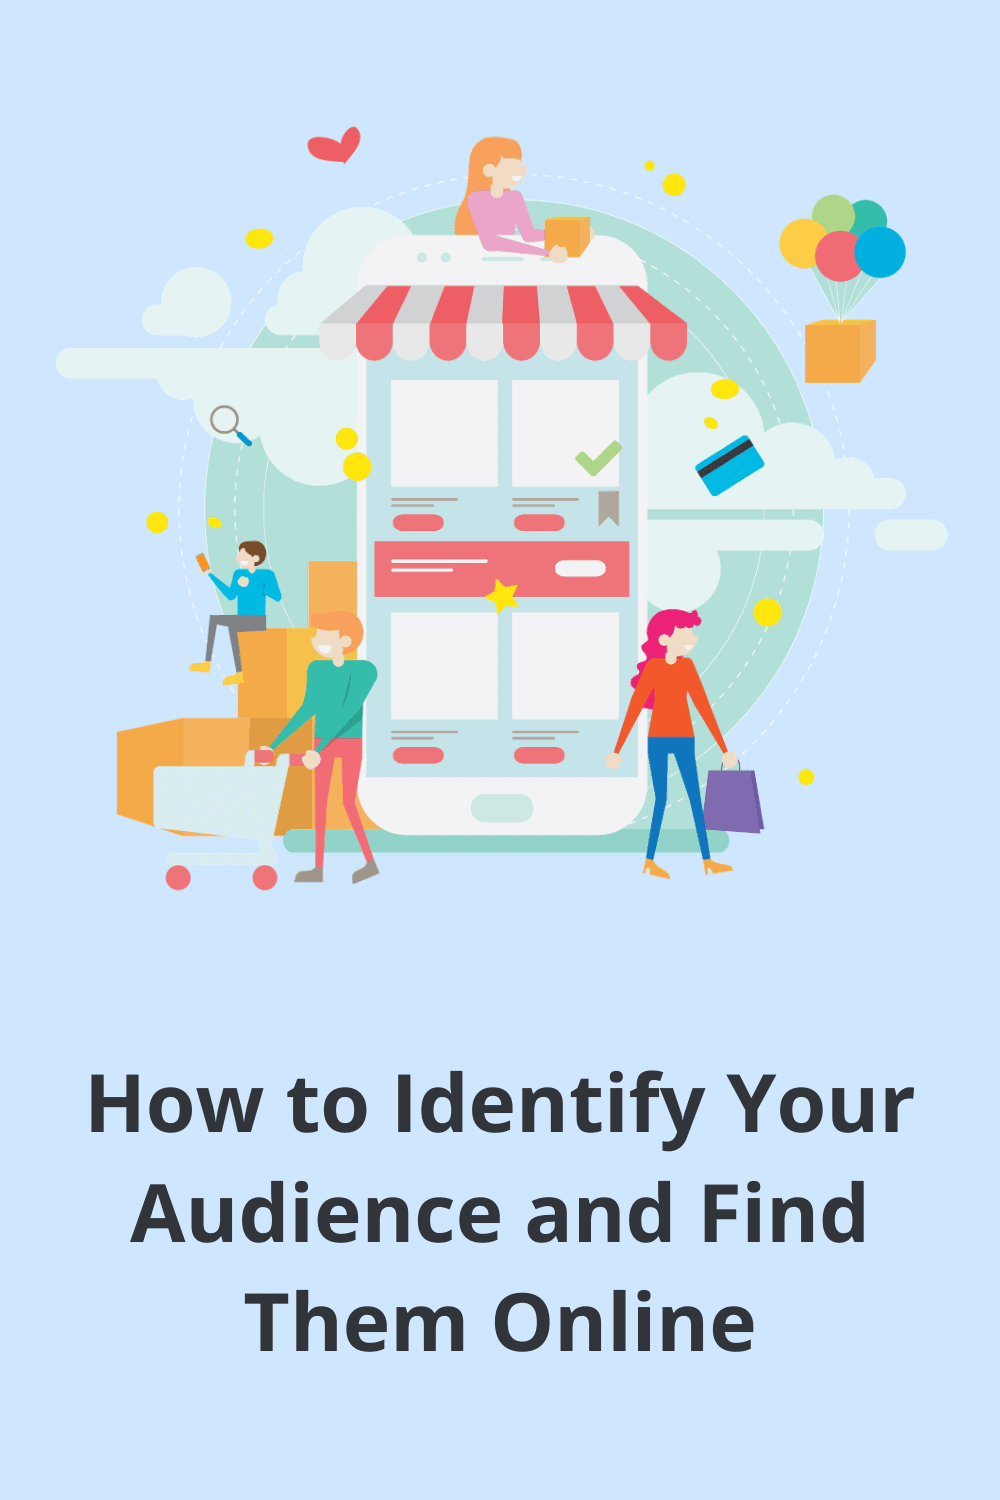 I’ll break down the process to help you first identify and then locate your audience, so you can fine-tune your marketing and get the leads you need. via @scopedesign